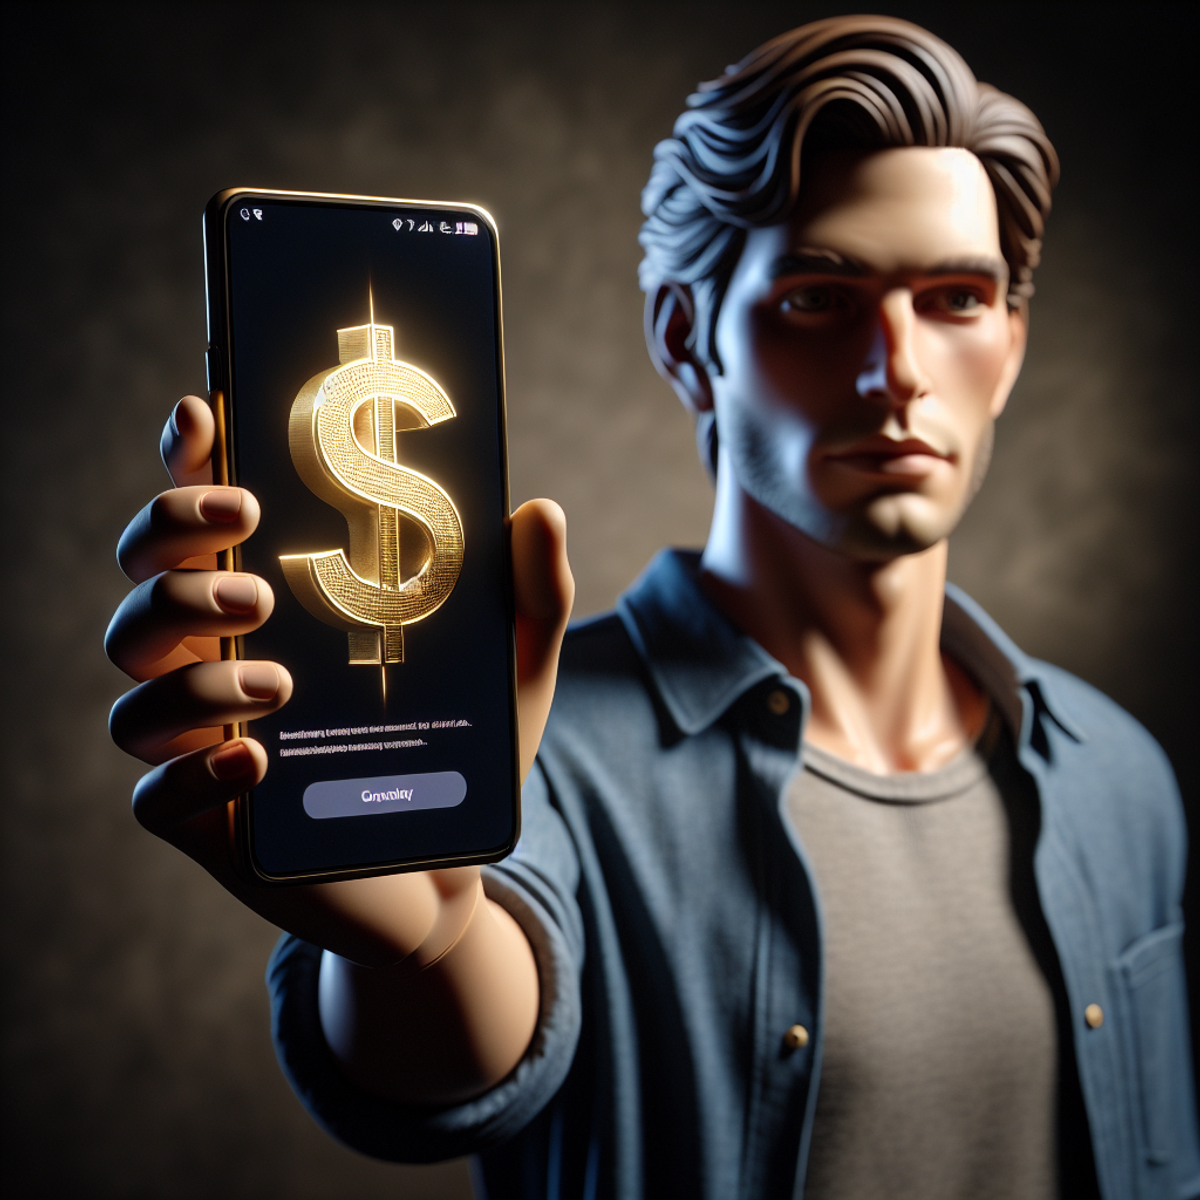 A man holding a smartphone with a money symbol on the screen.